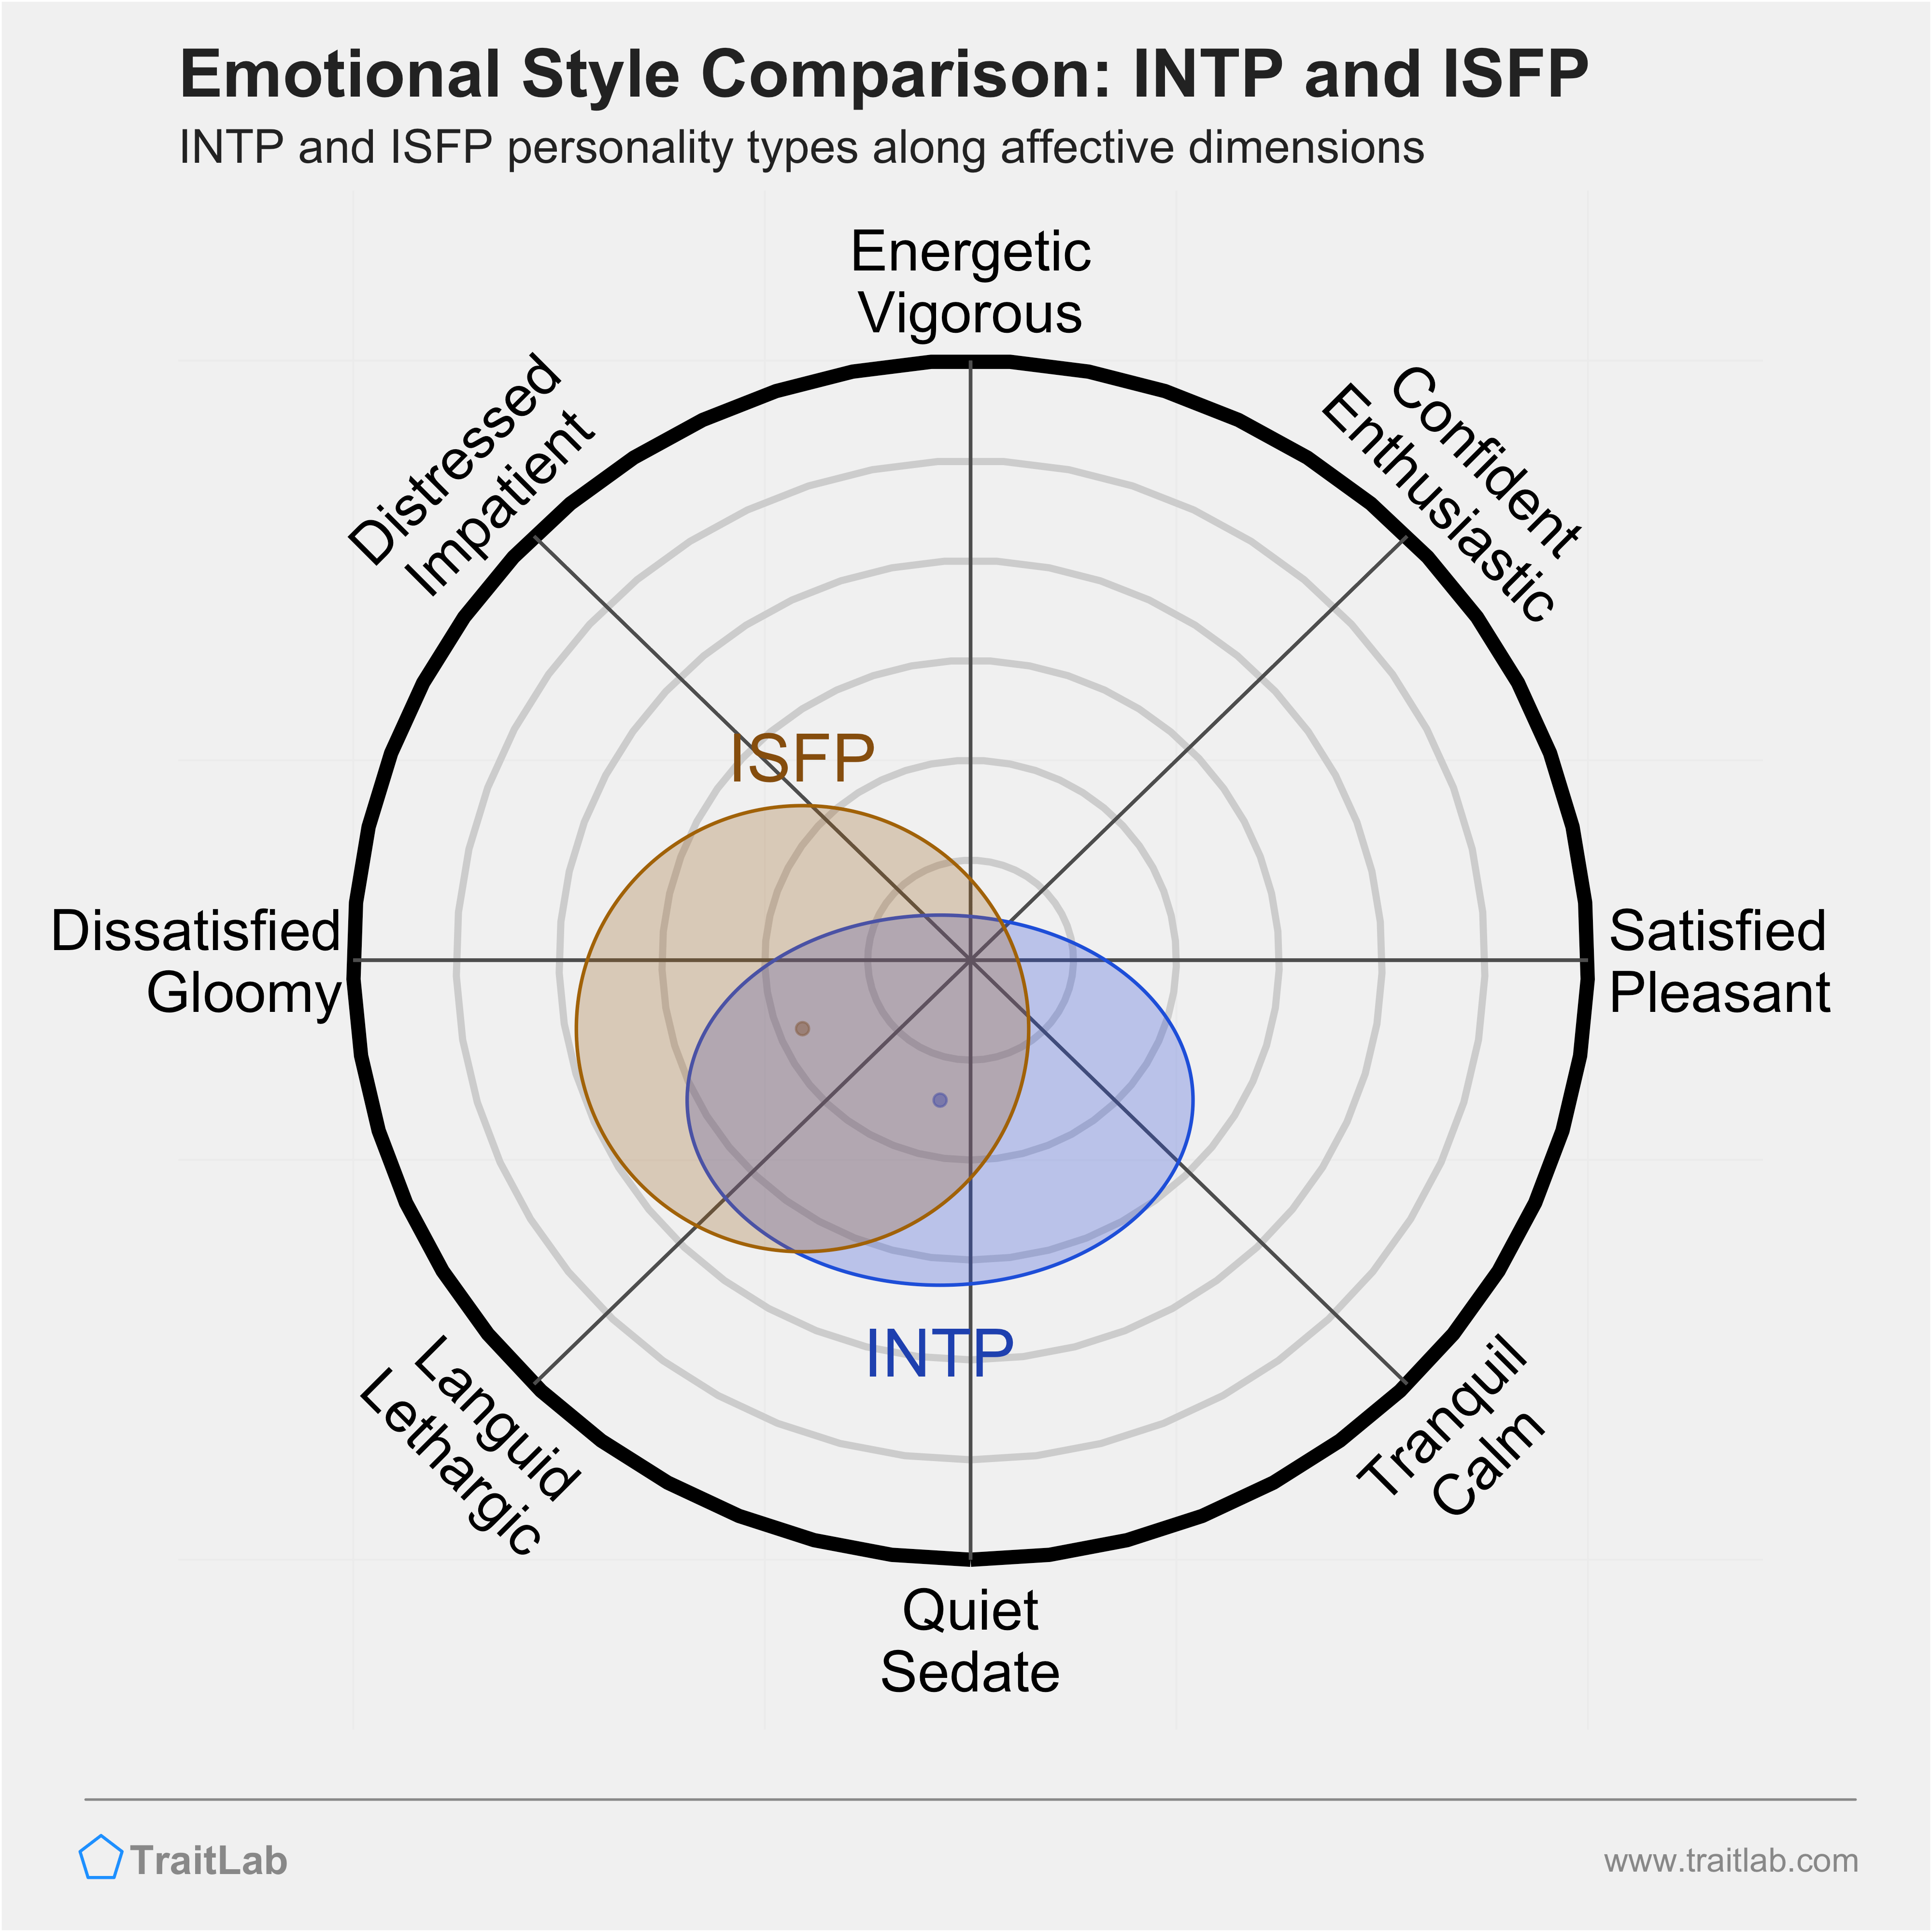 INTP and ISFP comparison across emotional (affective) dimensions